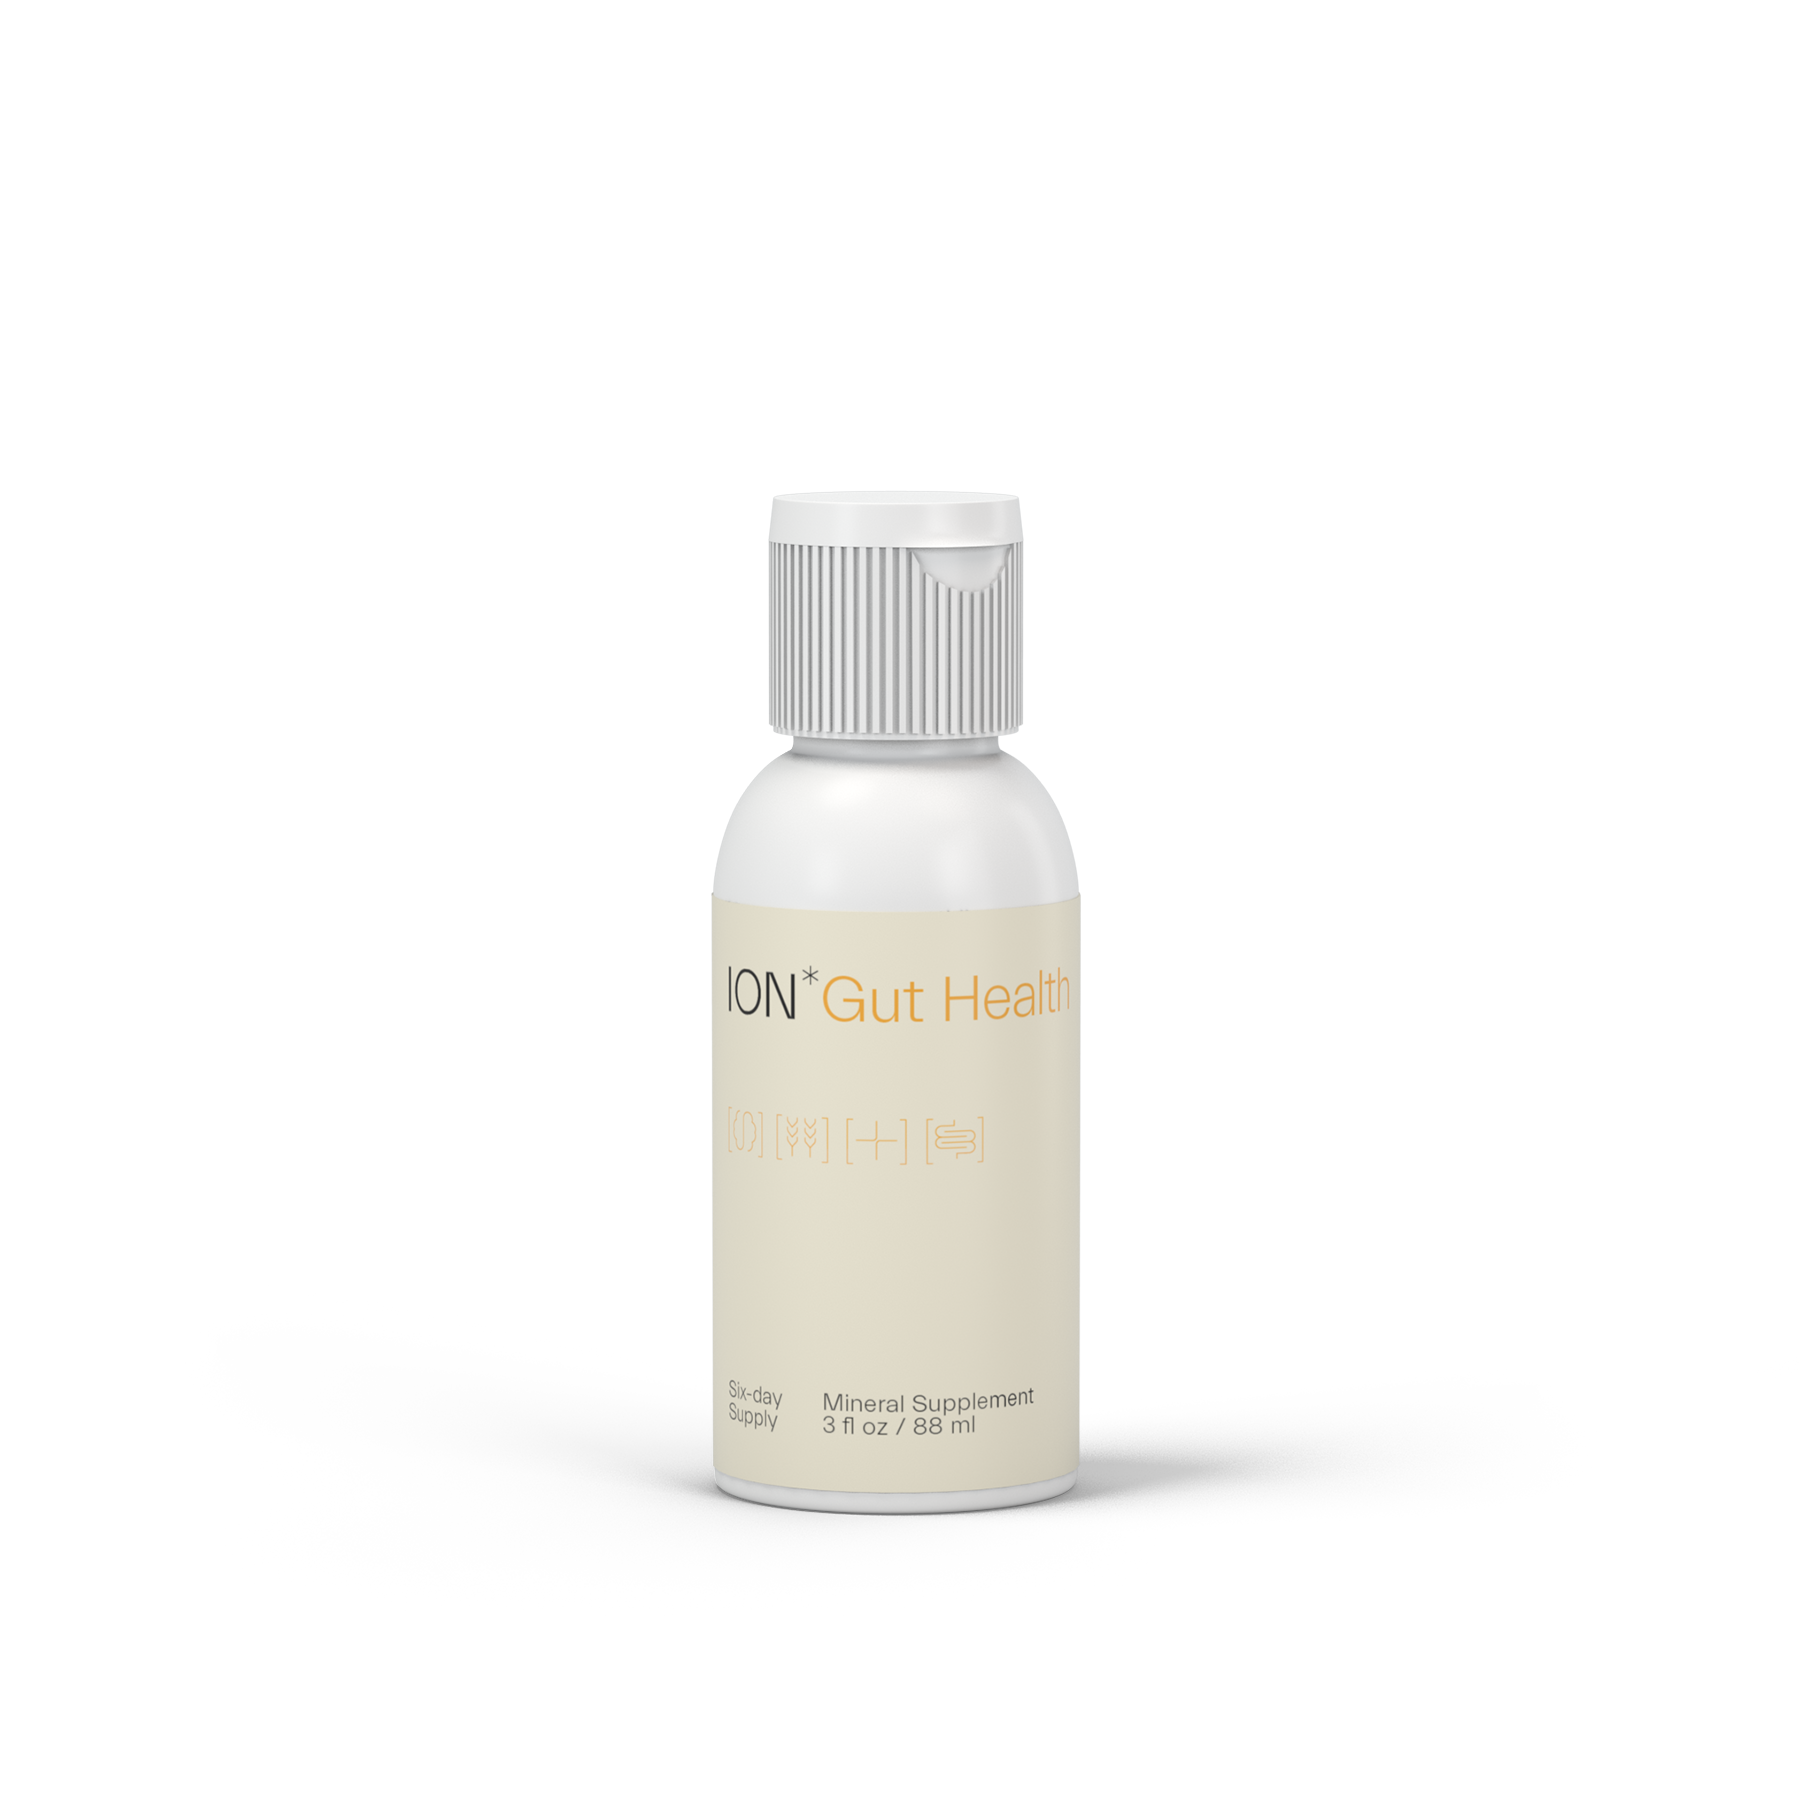 ION* Gut Health (formerly RESTORE) | Travel Size